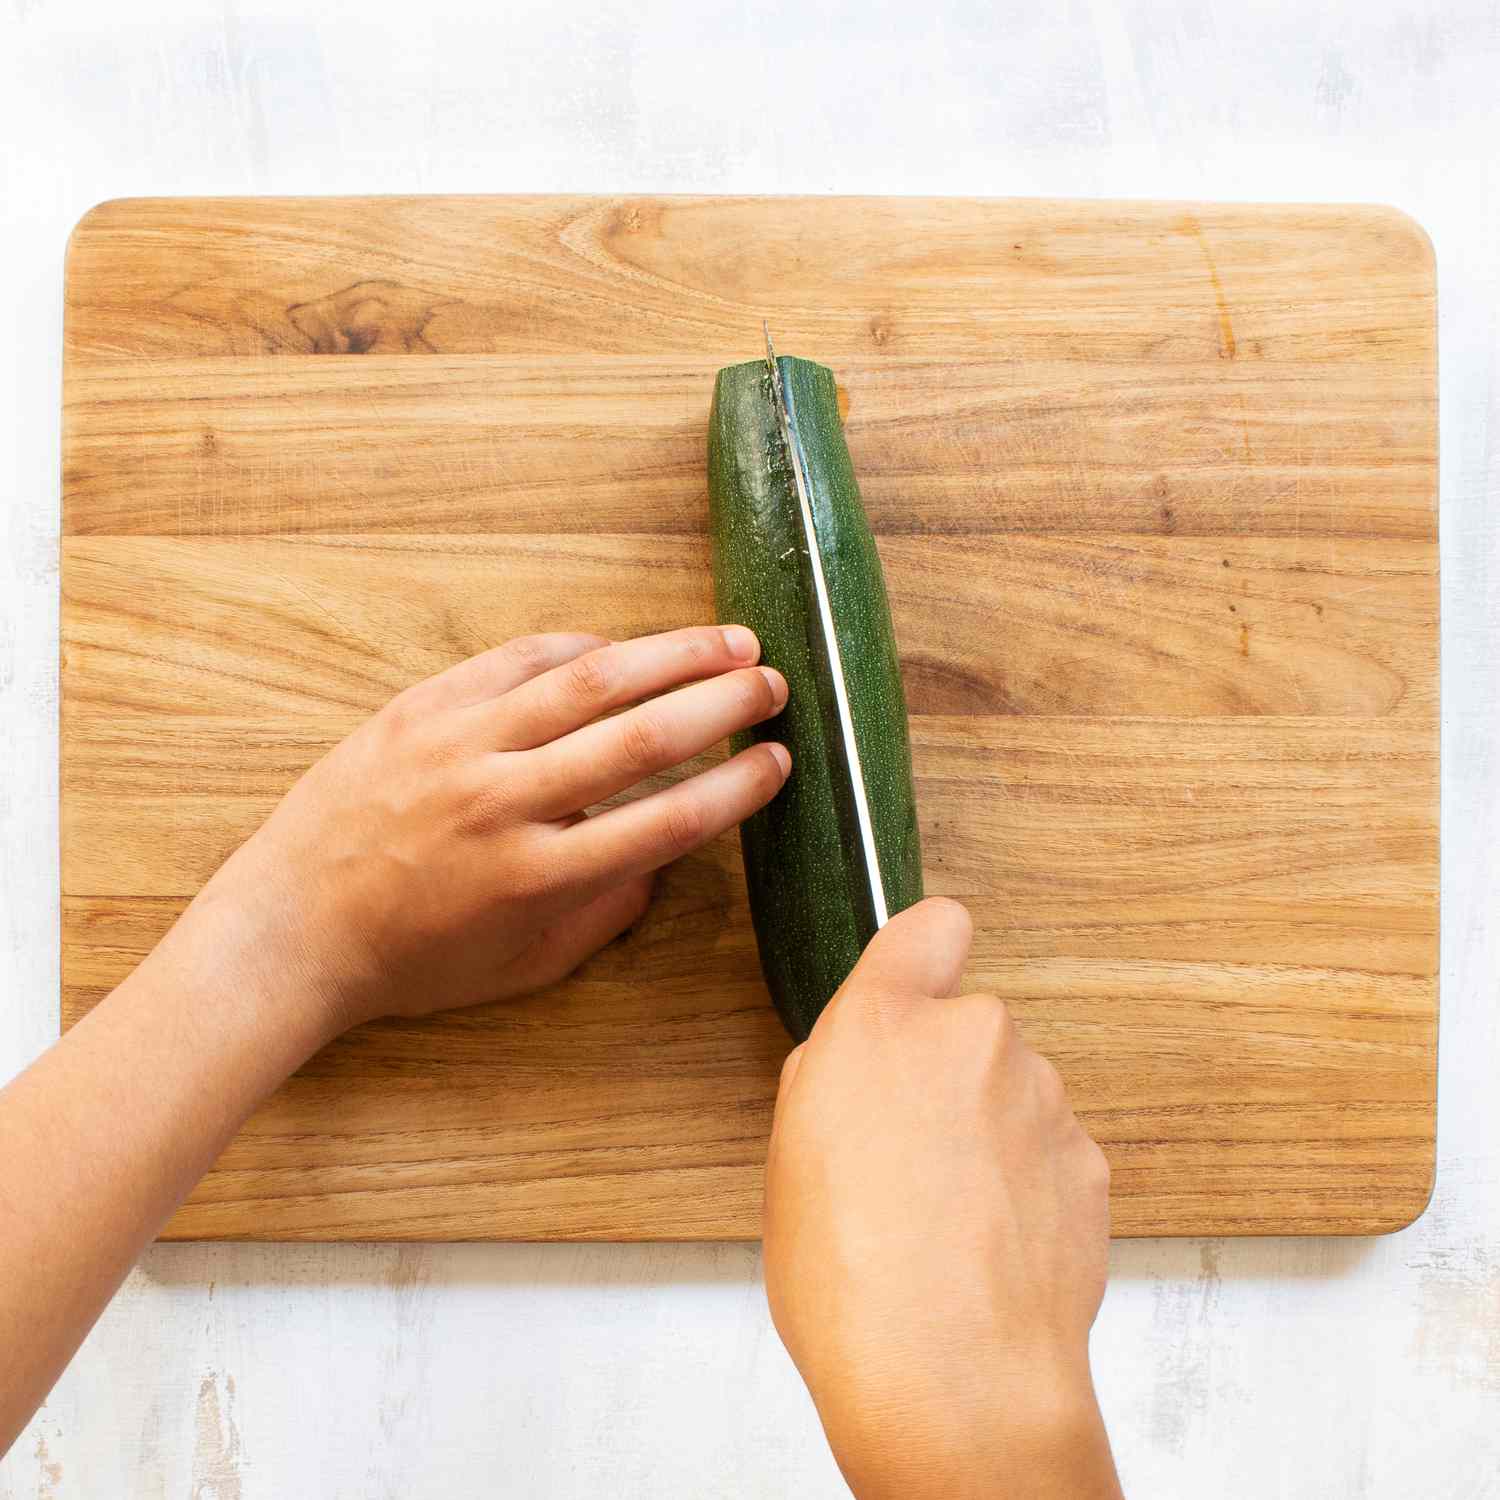 Hands using a knife to cut a zucchini on a wood cutting board